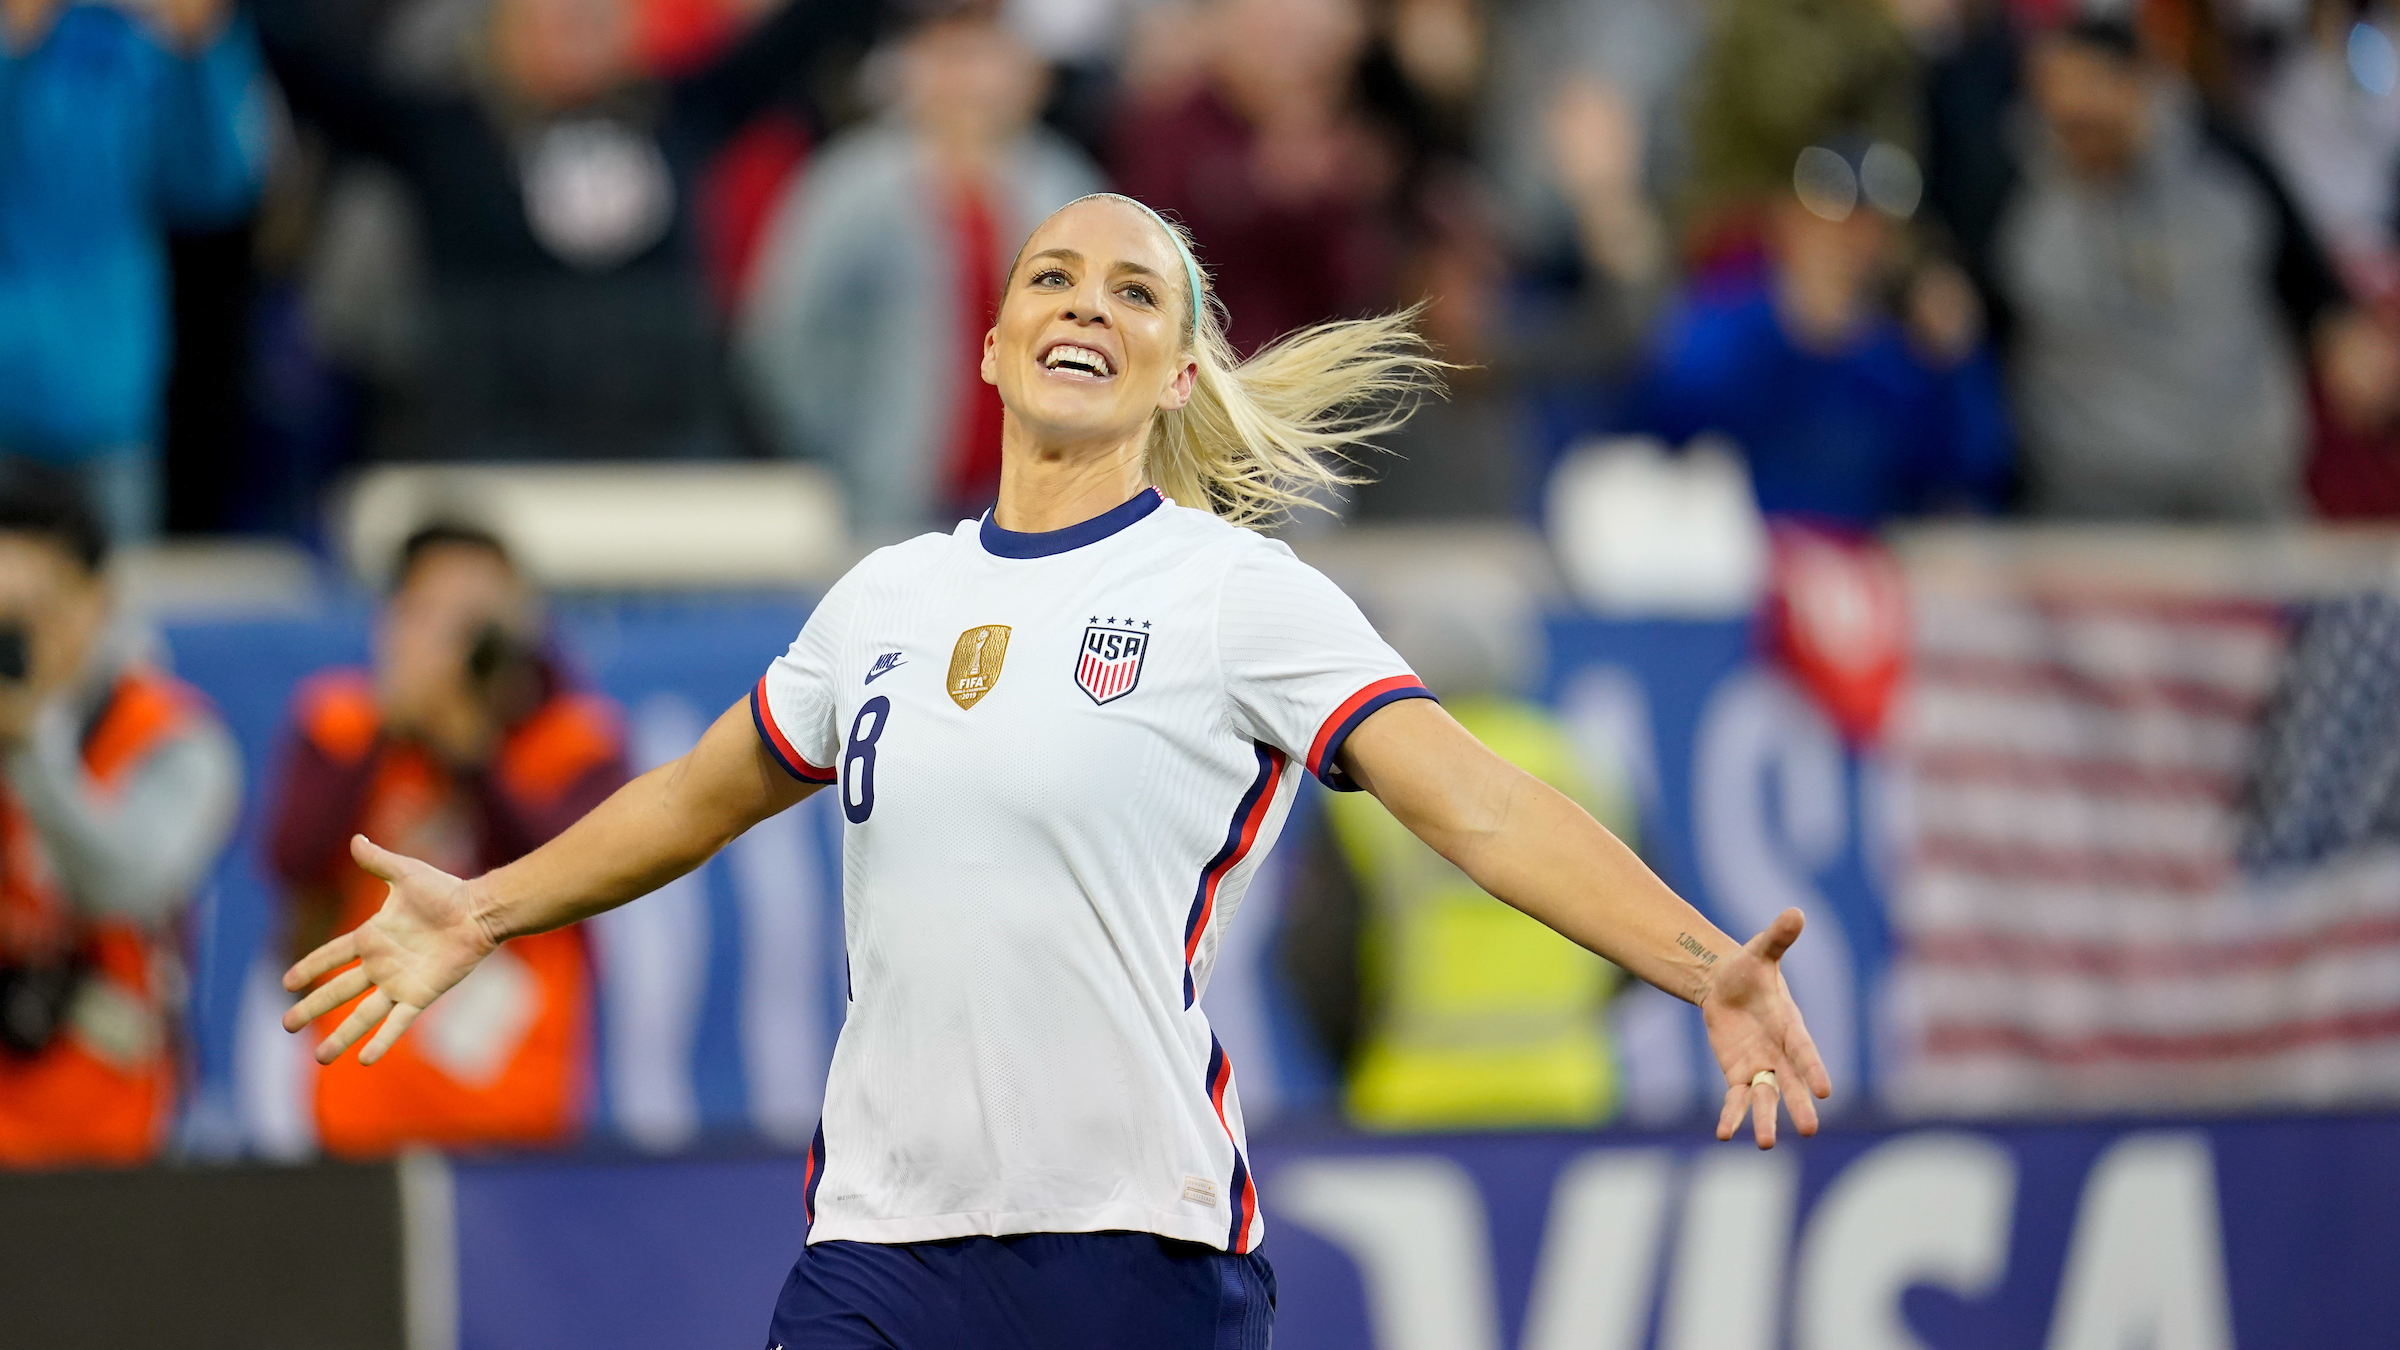 USWNT defeats Spain 10 in SheBelieves Cup match at soldout Red Bull